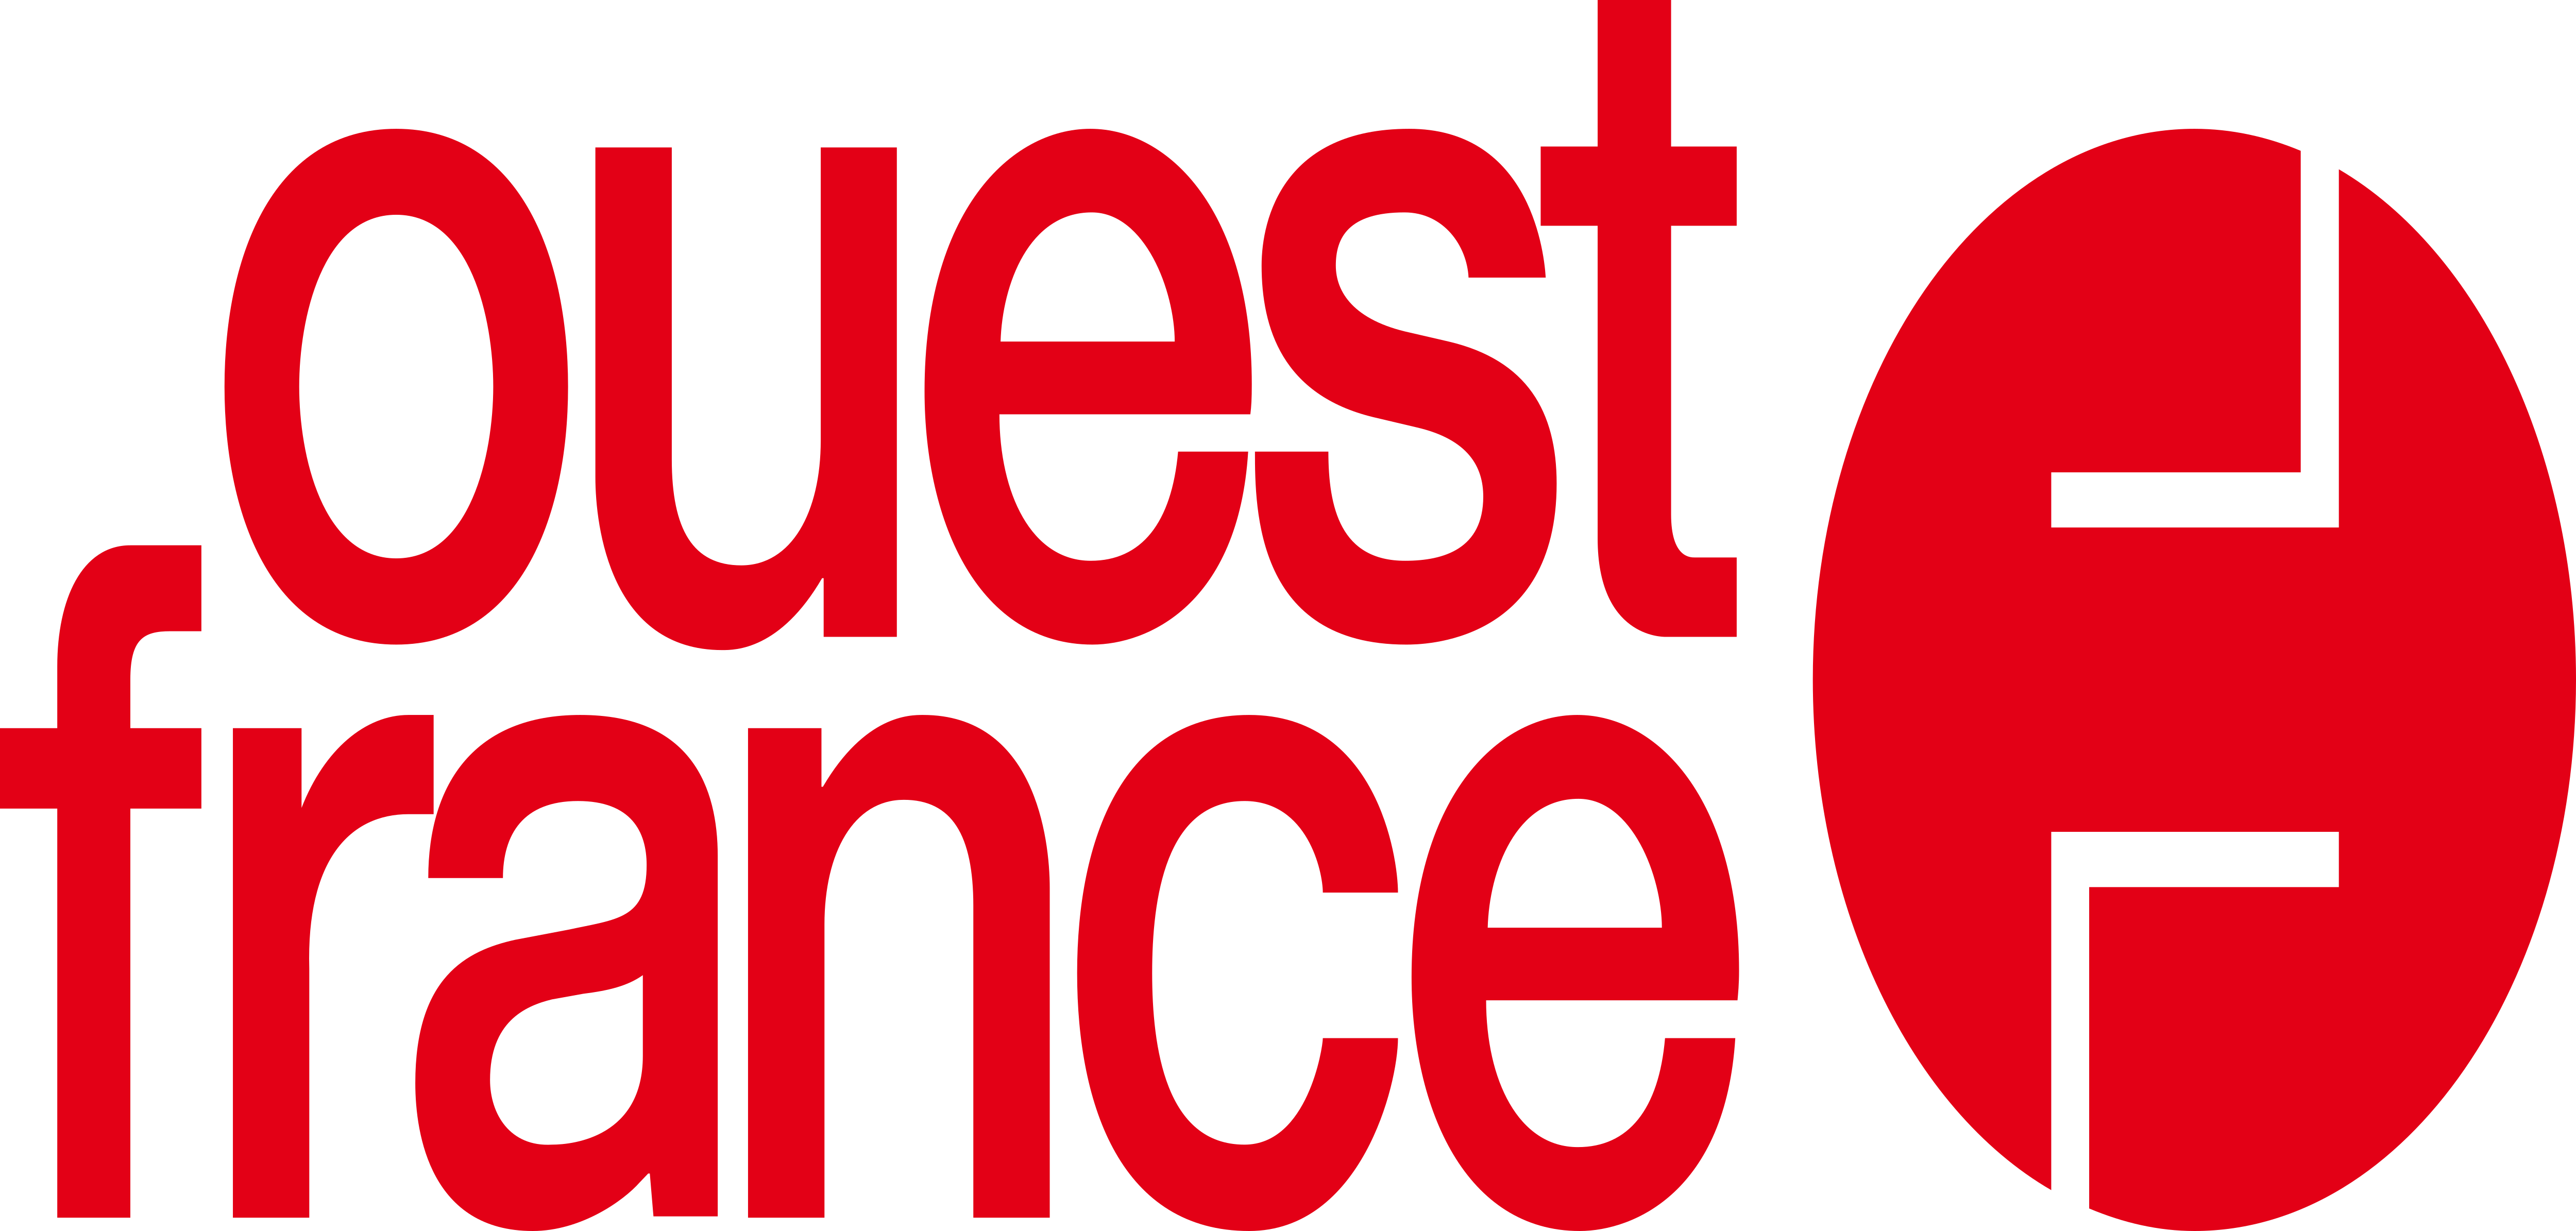 Ouest France – Logos Download